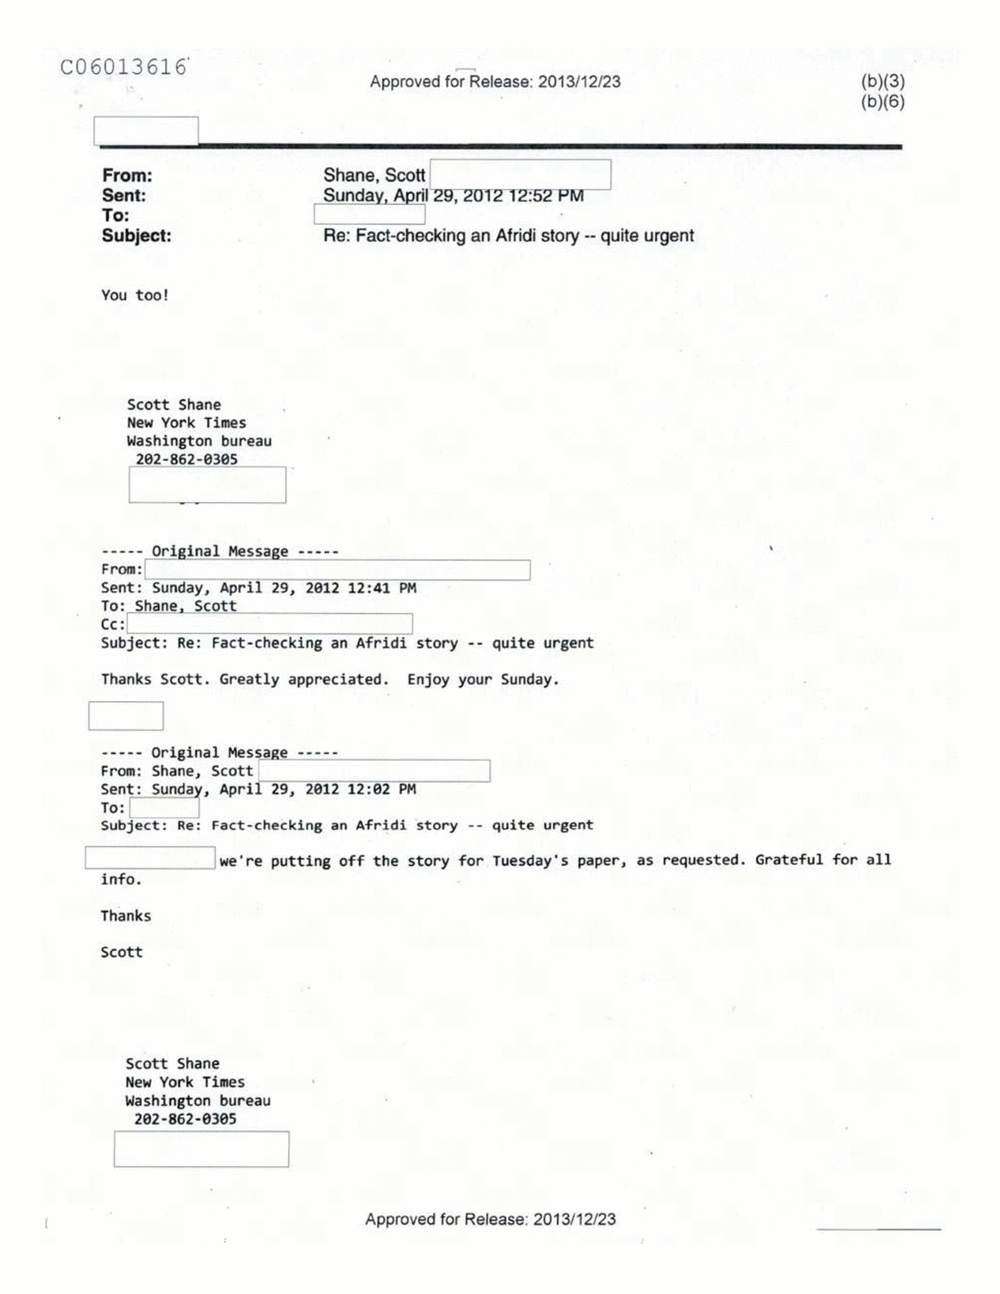 Page 441 from Email Correspondence Between Reporters and CIA Flacks